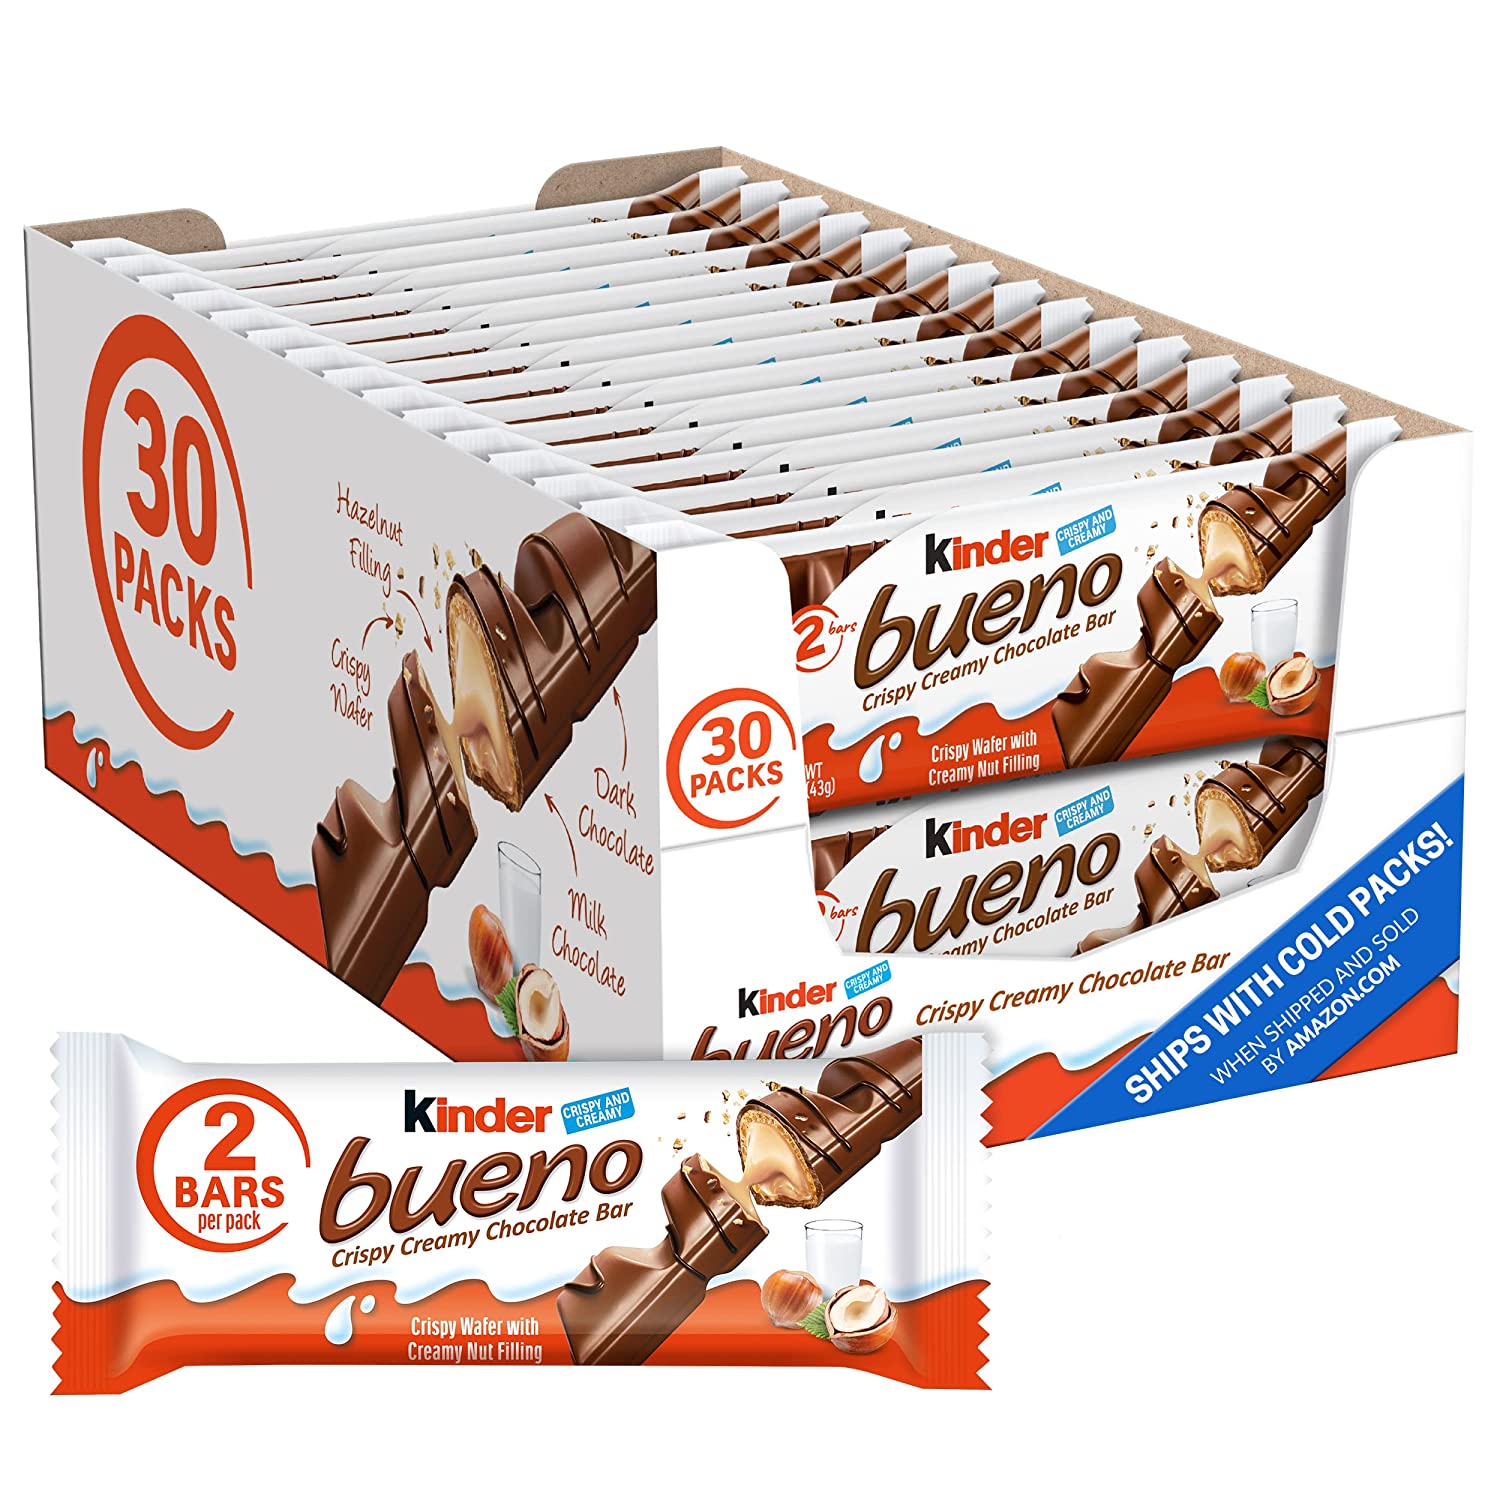 Kinder Bueno® is Giving Away Free Gas and Chocolate Bars to Help